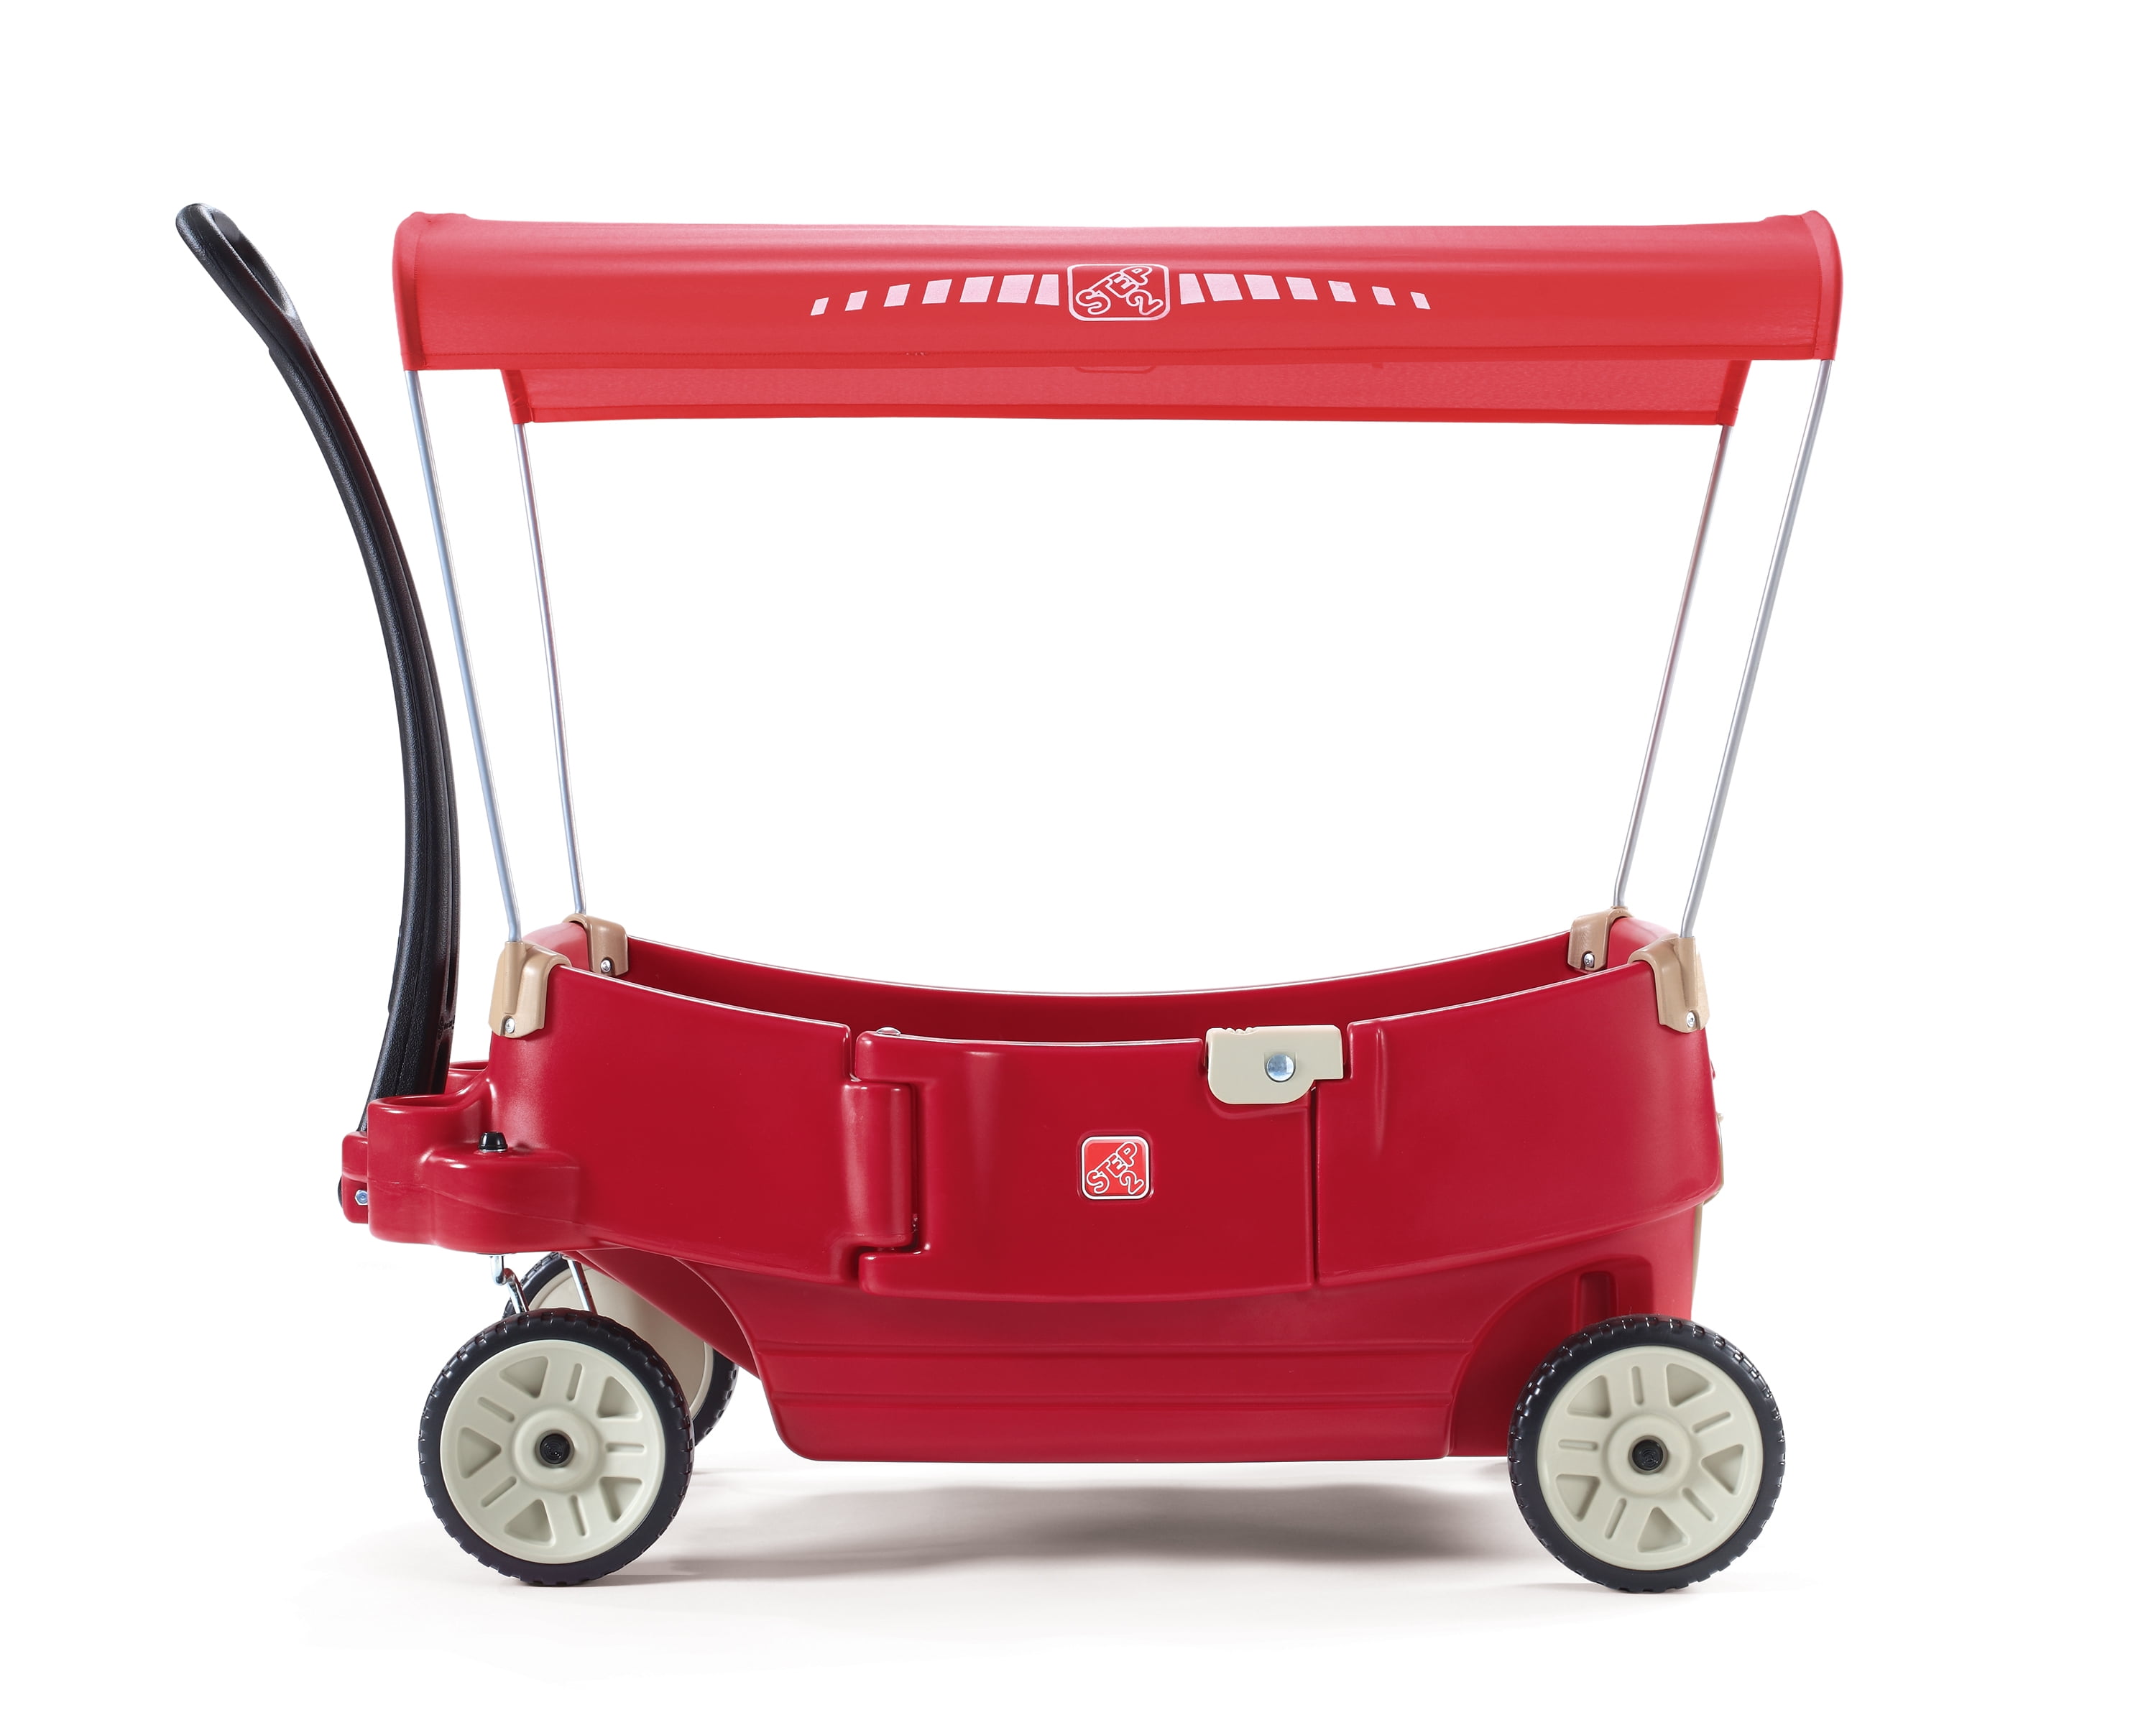 Radio Flyer 3156 Deluxe Family Canopy Wagon for sale online 